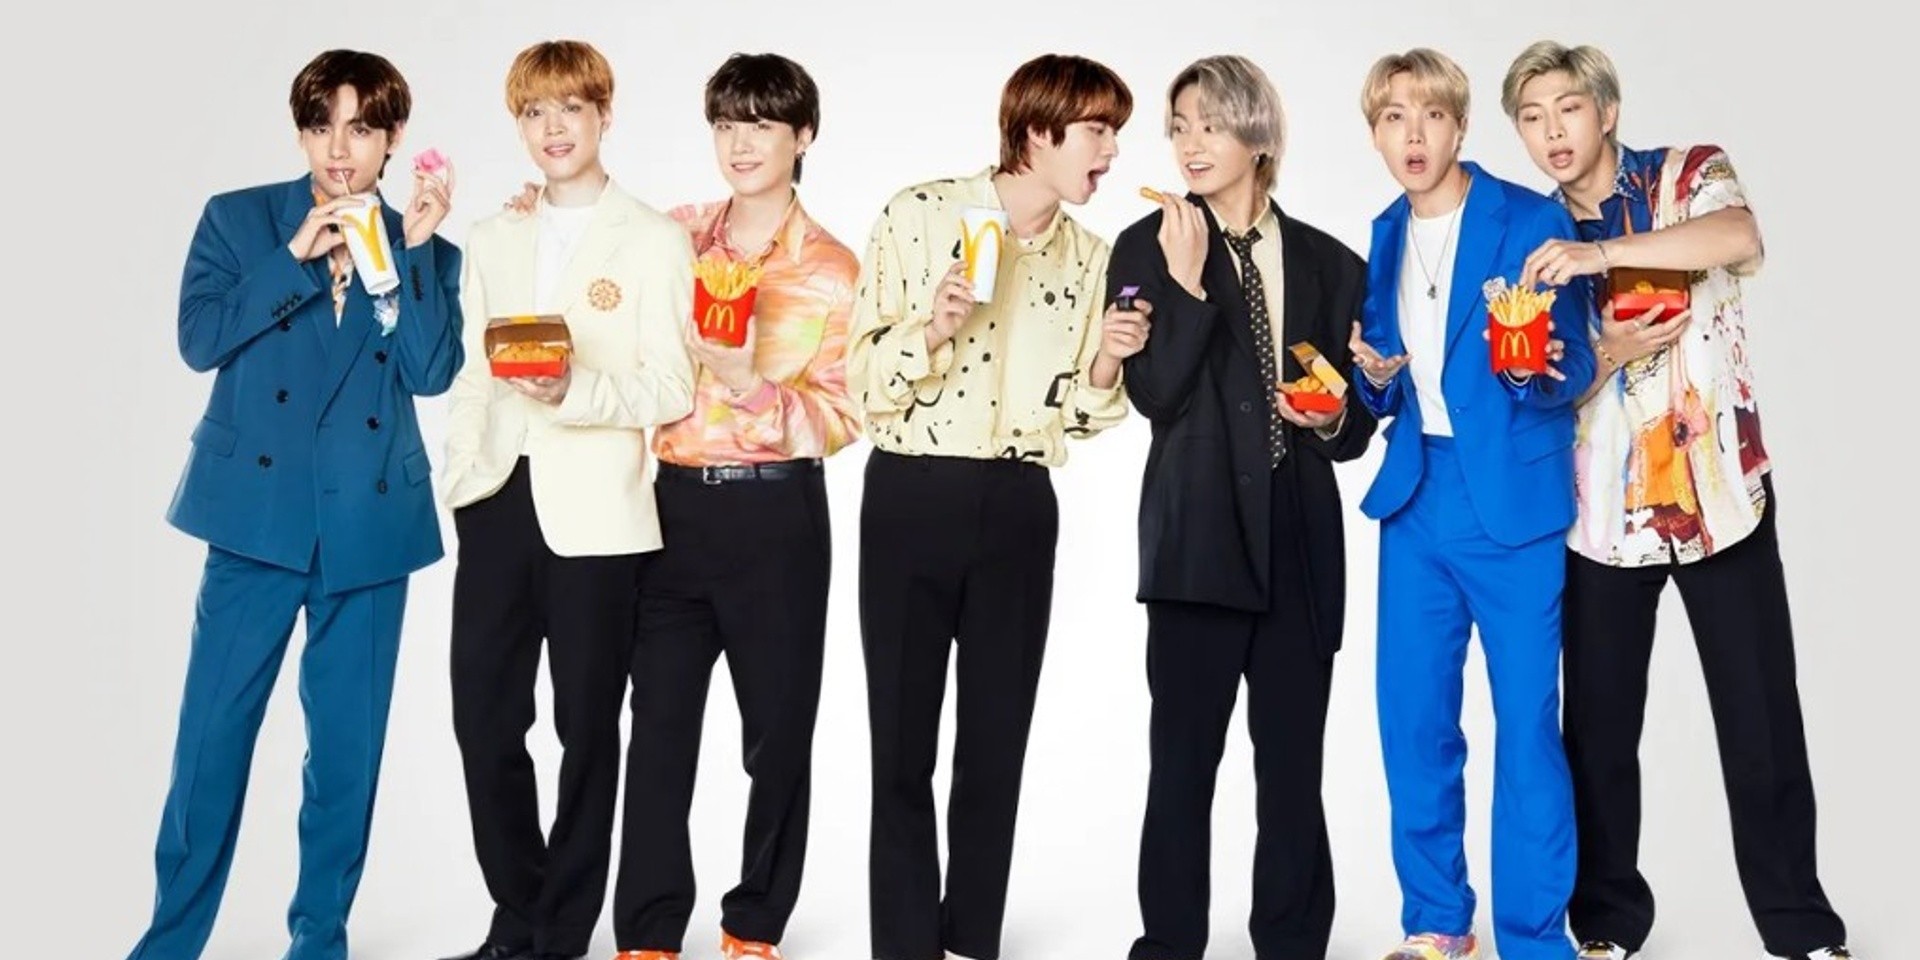 The BTS Meal is coming to the Philippines, Singapore, Indonesia, Malaysia, India, Thailand, and more, here's what you need to know